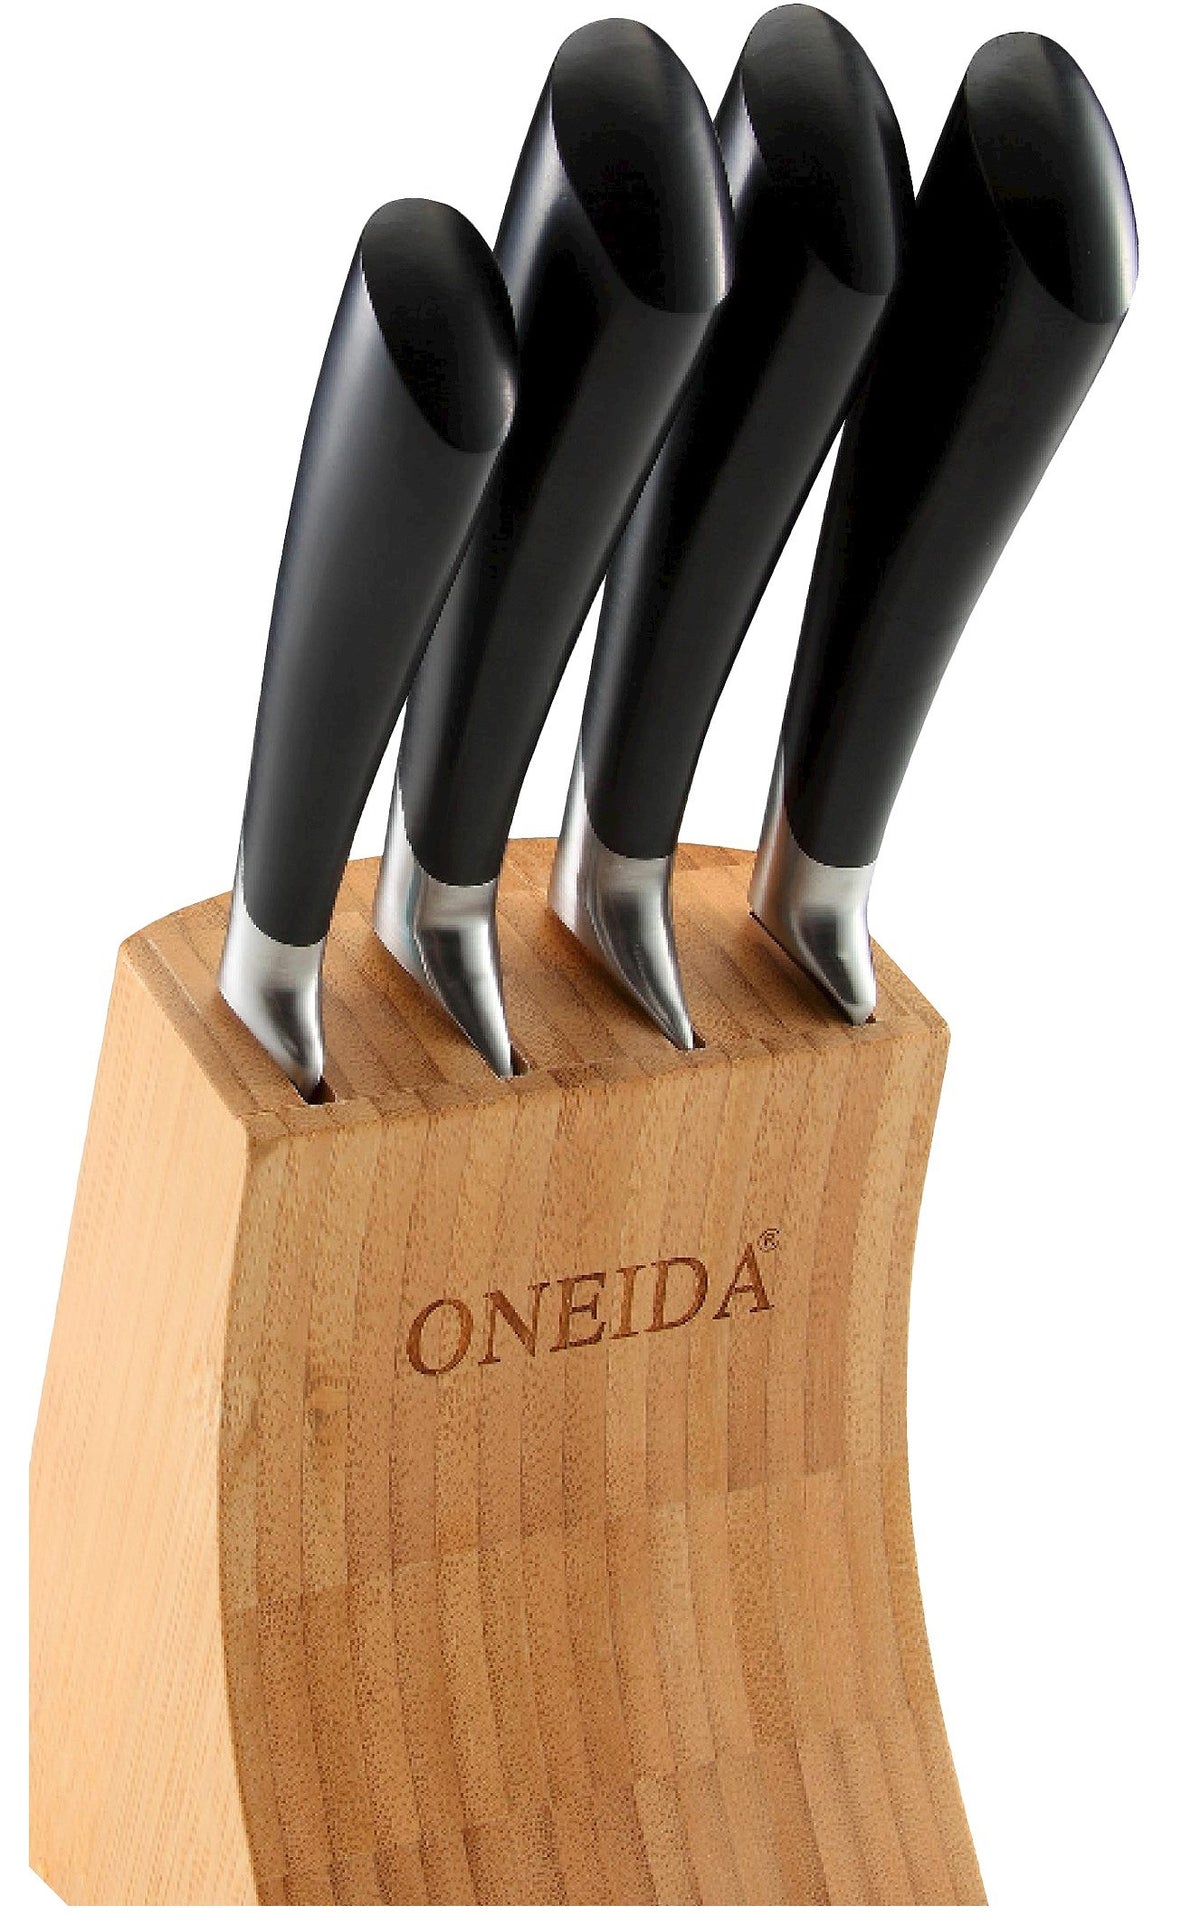 buy knife sets & cutlery at cheap rate in bulk. wholesale & retail kitchen materials store.